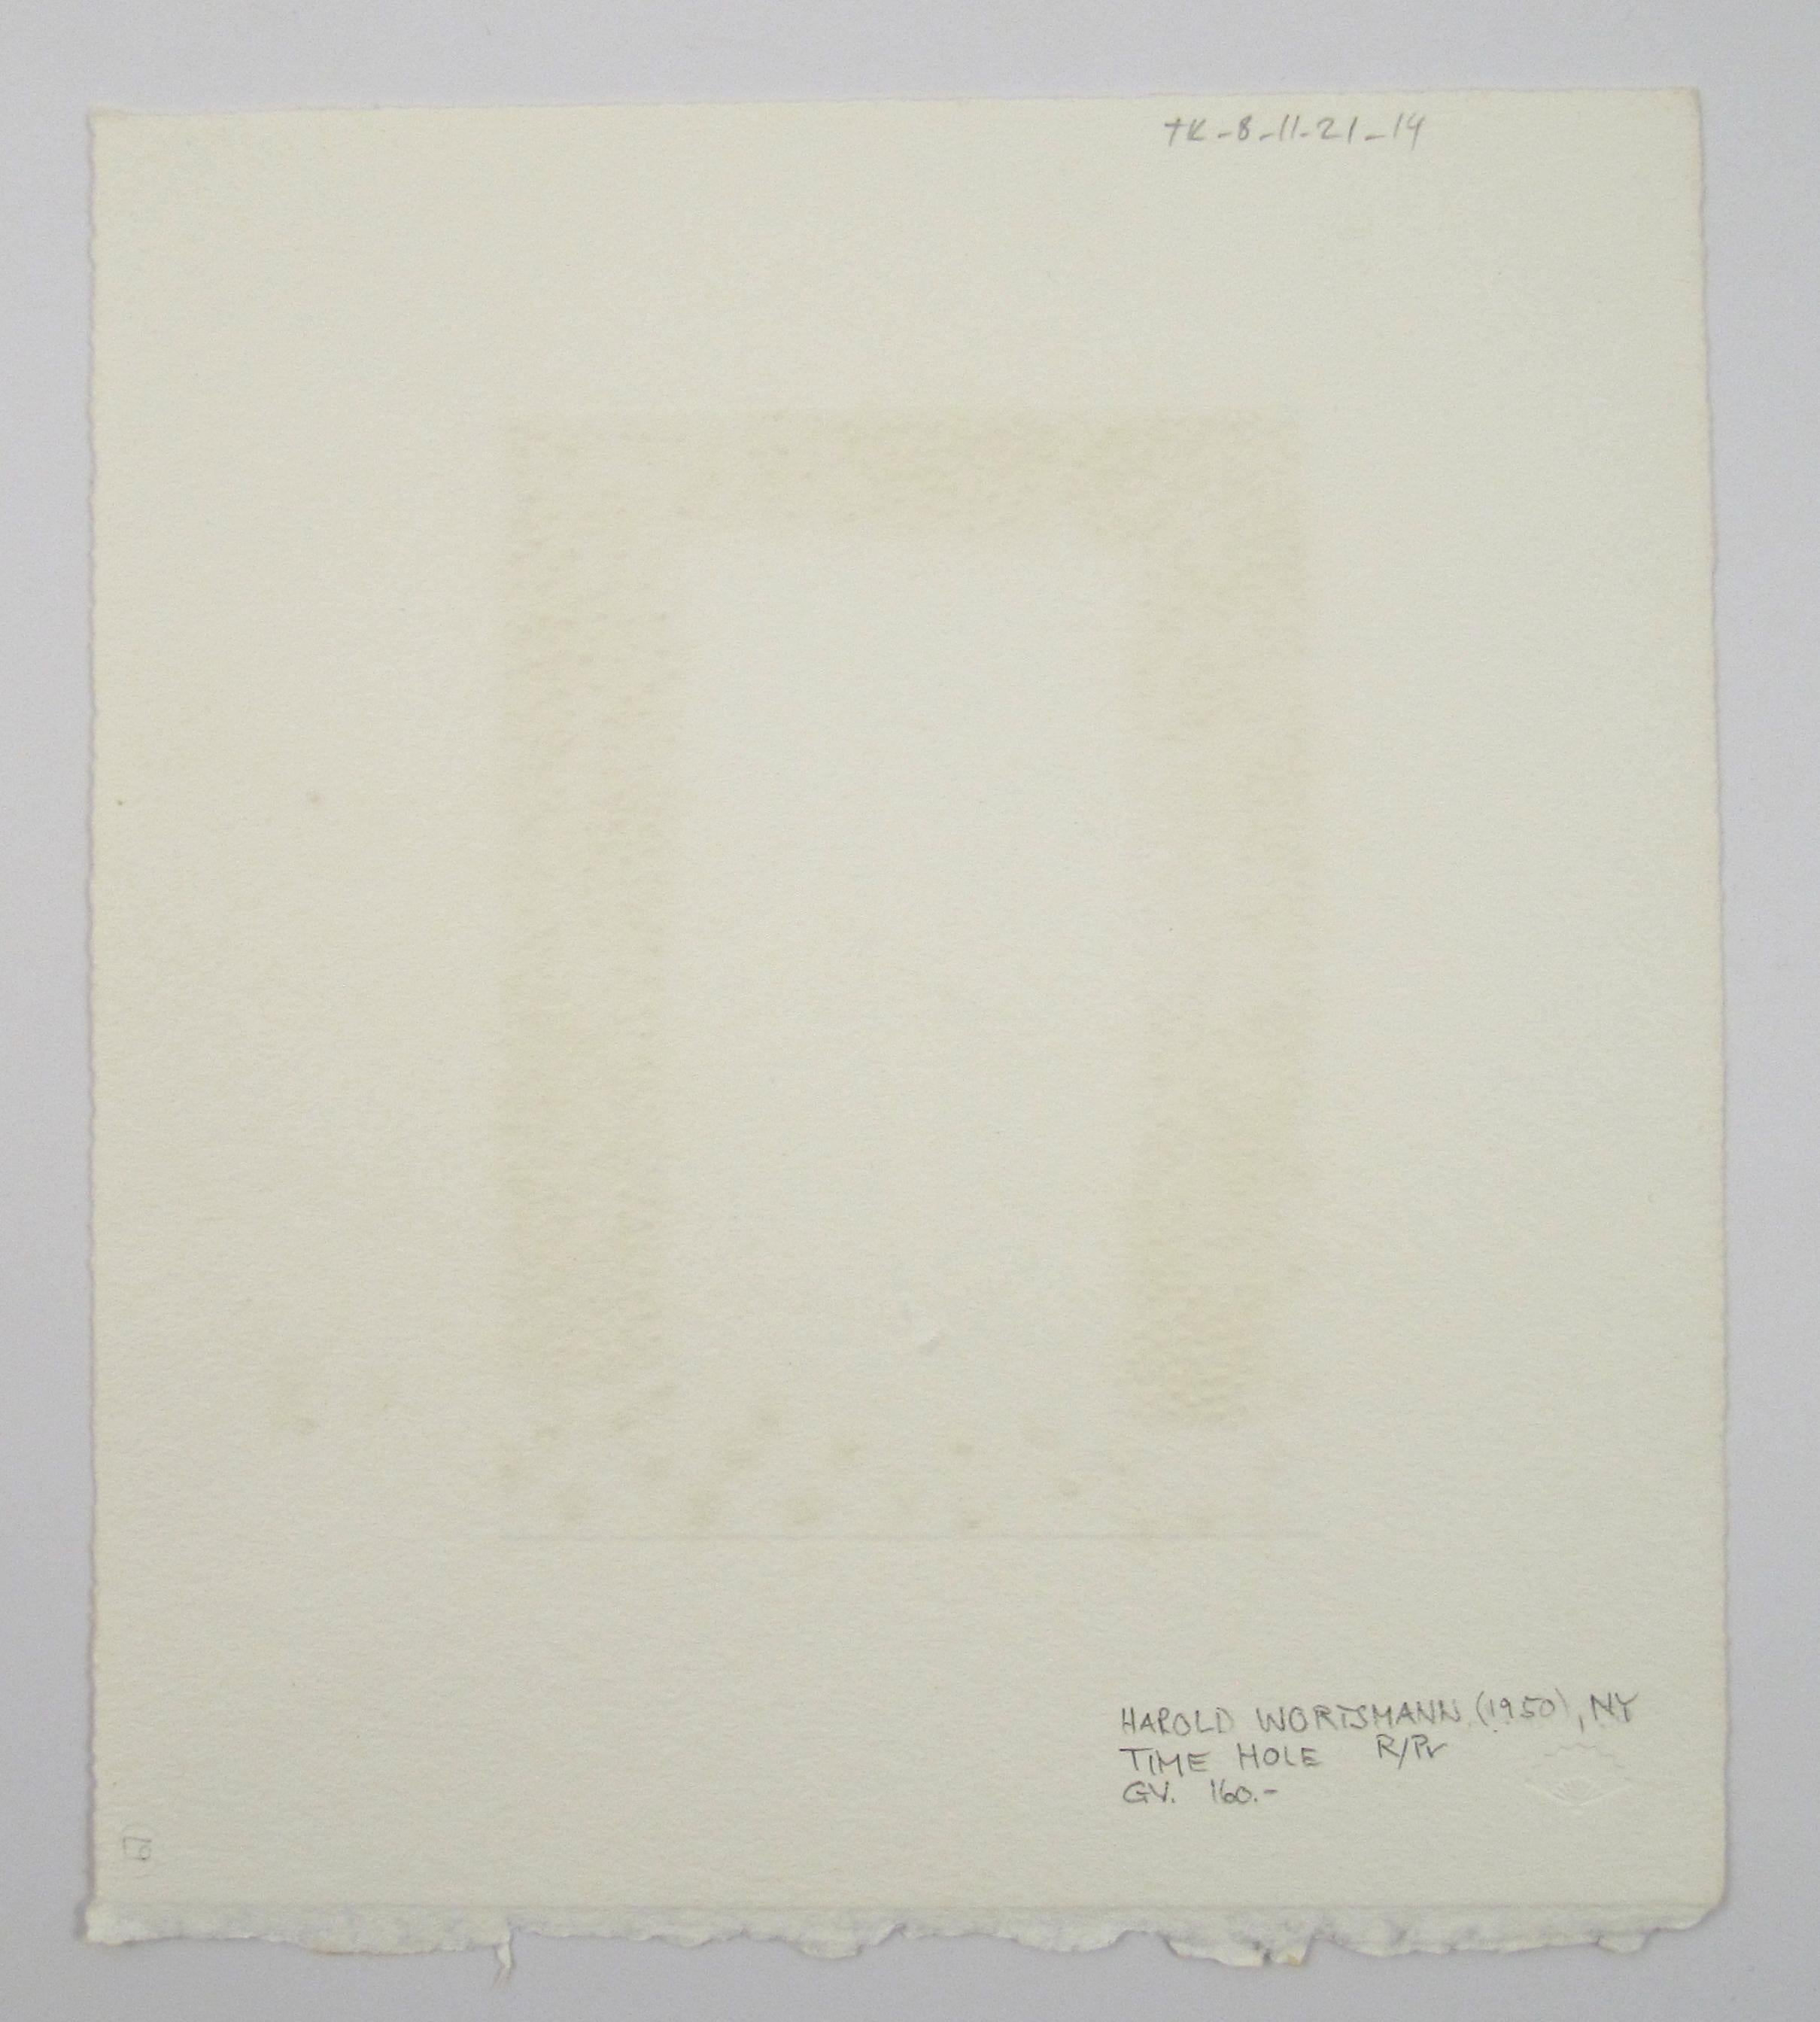 Harold Wortsmann (USA,  1950) - Limited Colored Engraving 16/20 - Time Hole For Sale 2